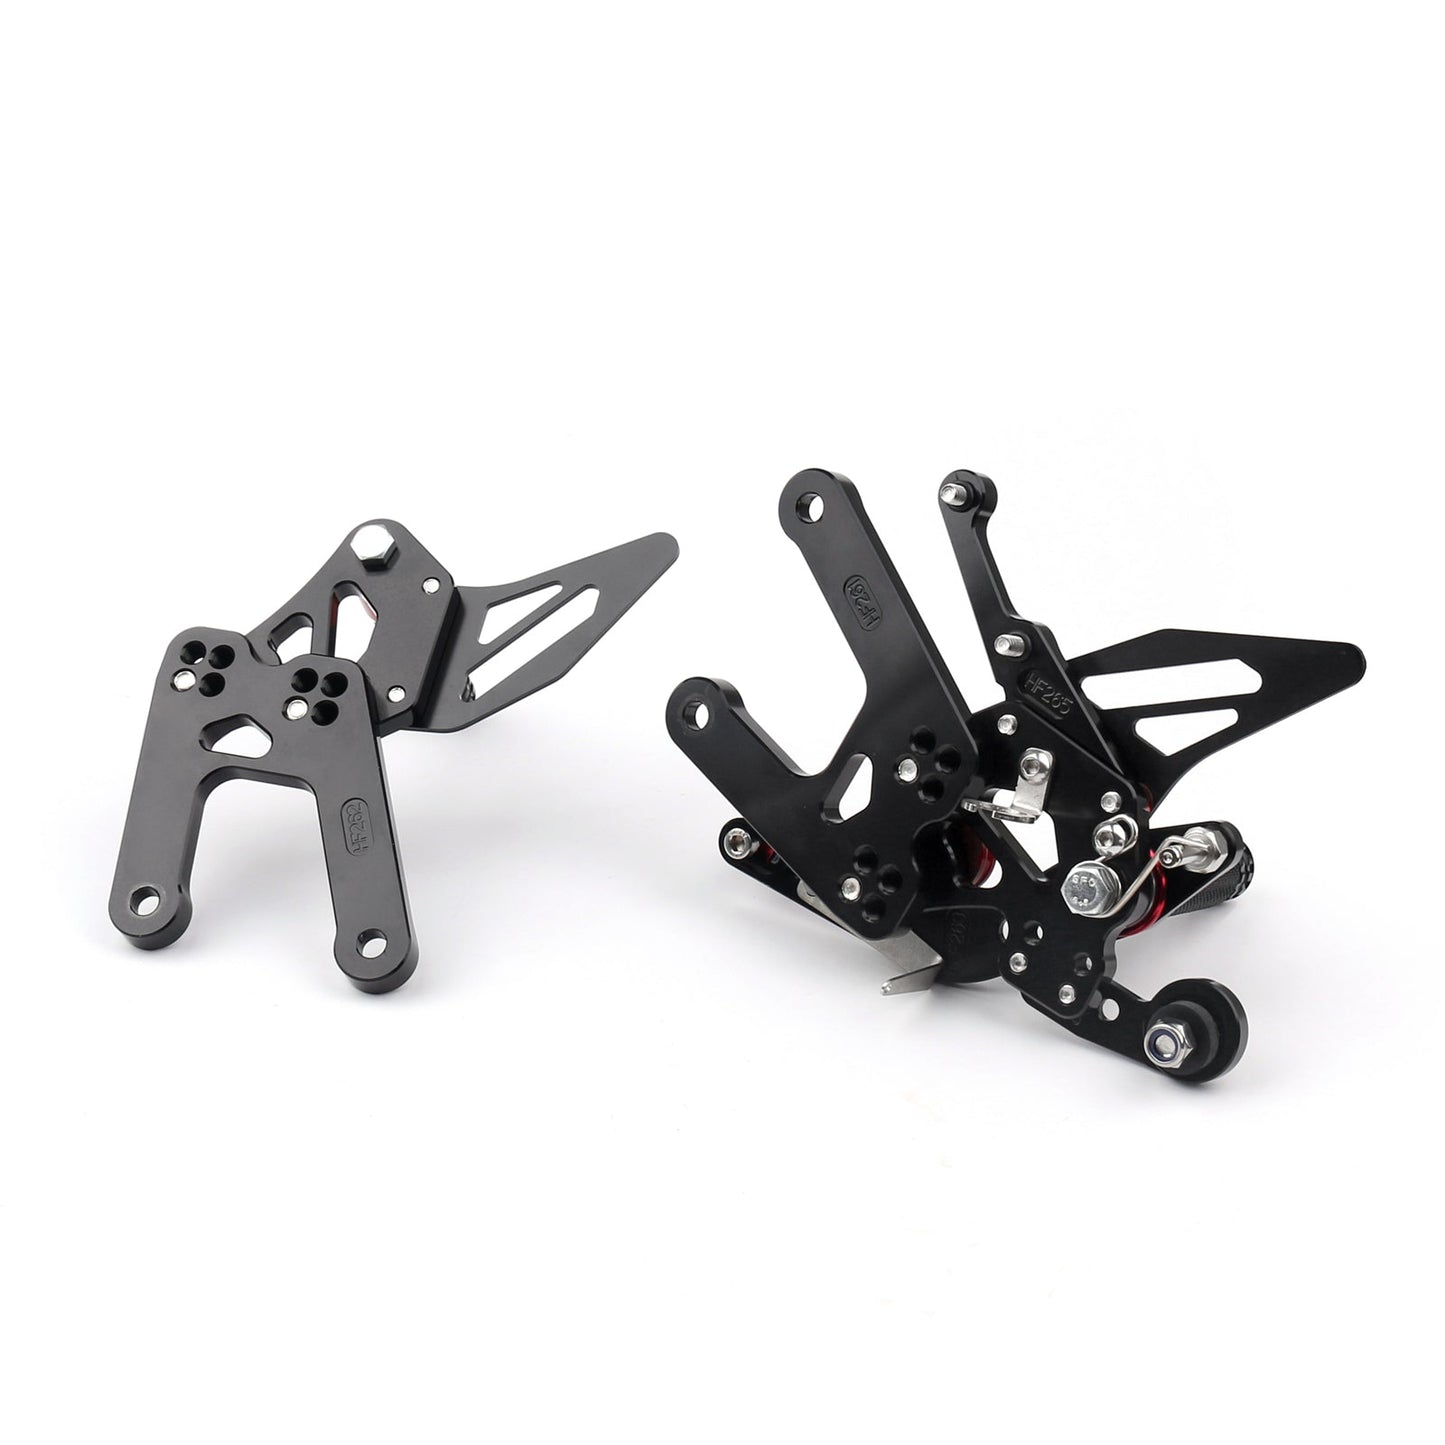 Motorcycle Adjustable Rearset Rearsets Foot Pegs For Yamaha Yzf R6 2020 Black